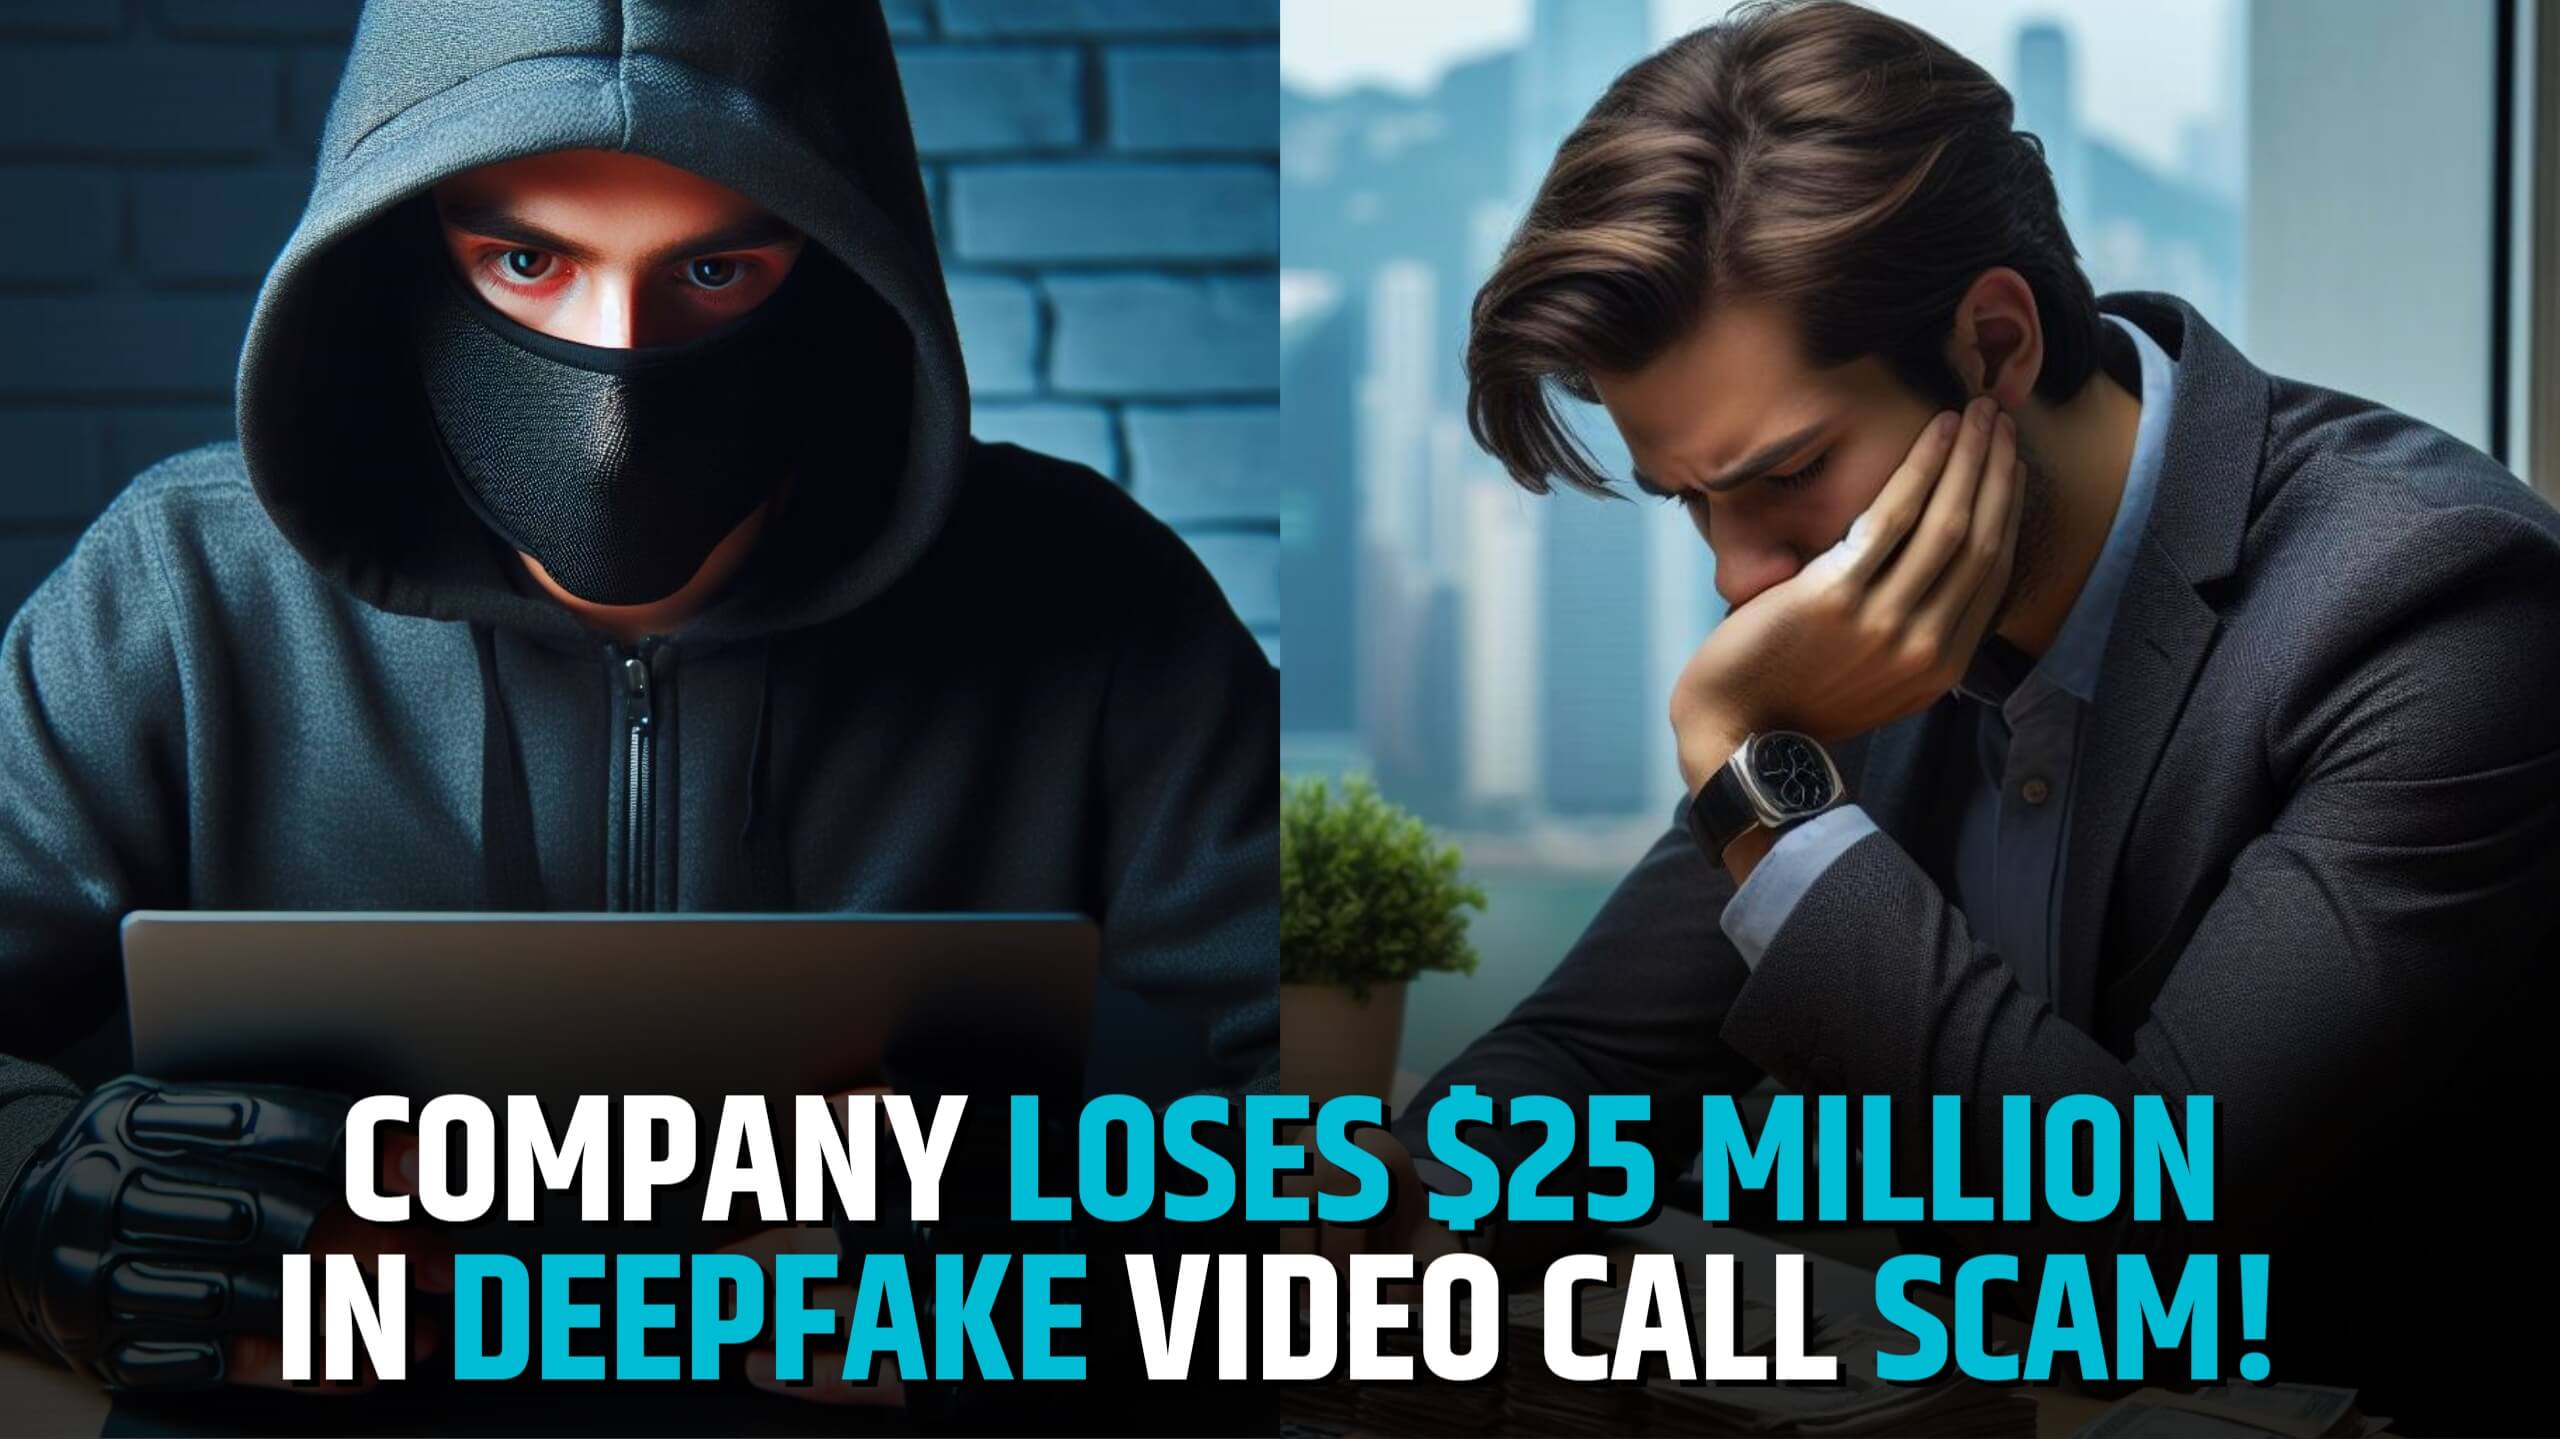 Hong Kong Company Loses $25 Million in Deepfake Video Call Scam